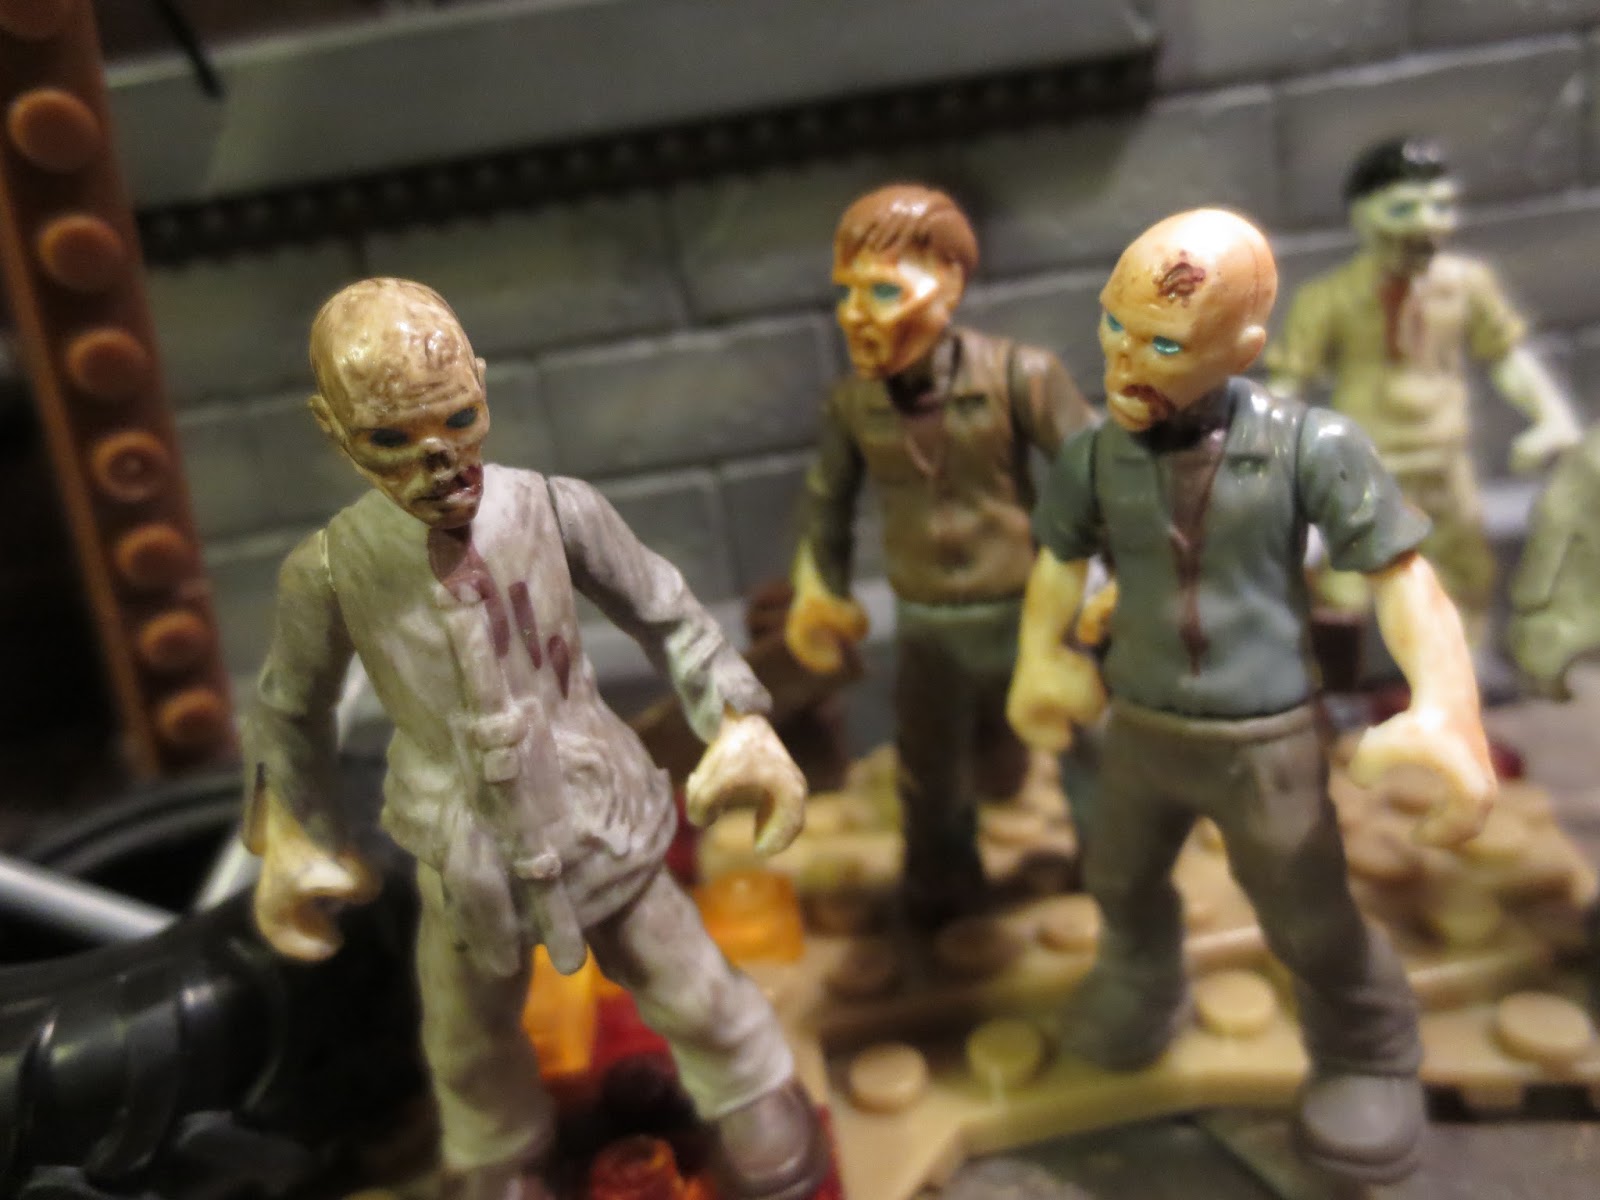 lot 3 Bloks Call of Duty Zombies Outbreak the Walking Dead action figure 2" #E3 